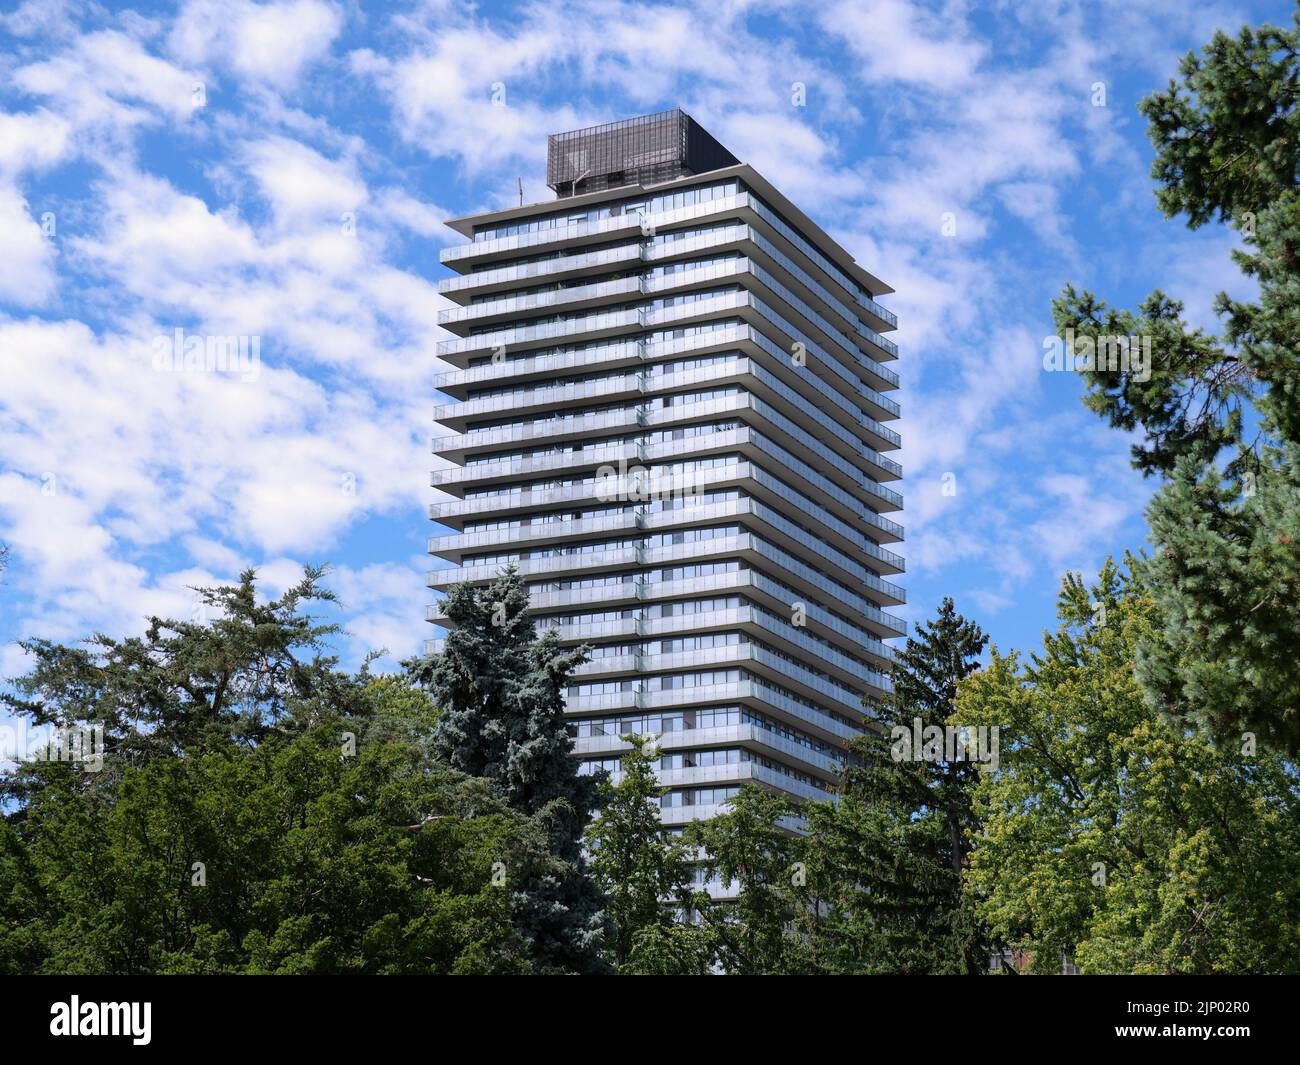 Tall modern apartment building with balconies, surrounded by trees Stock Photo